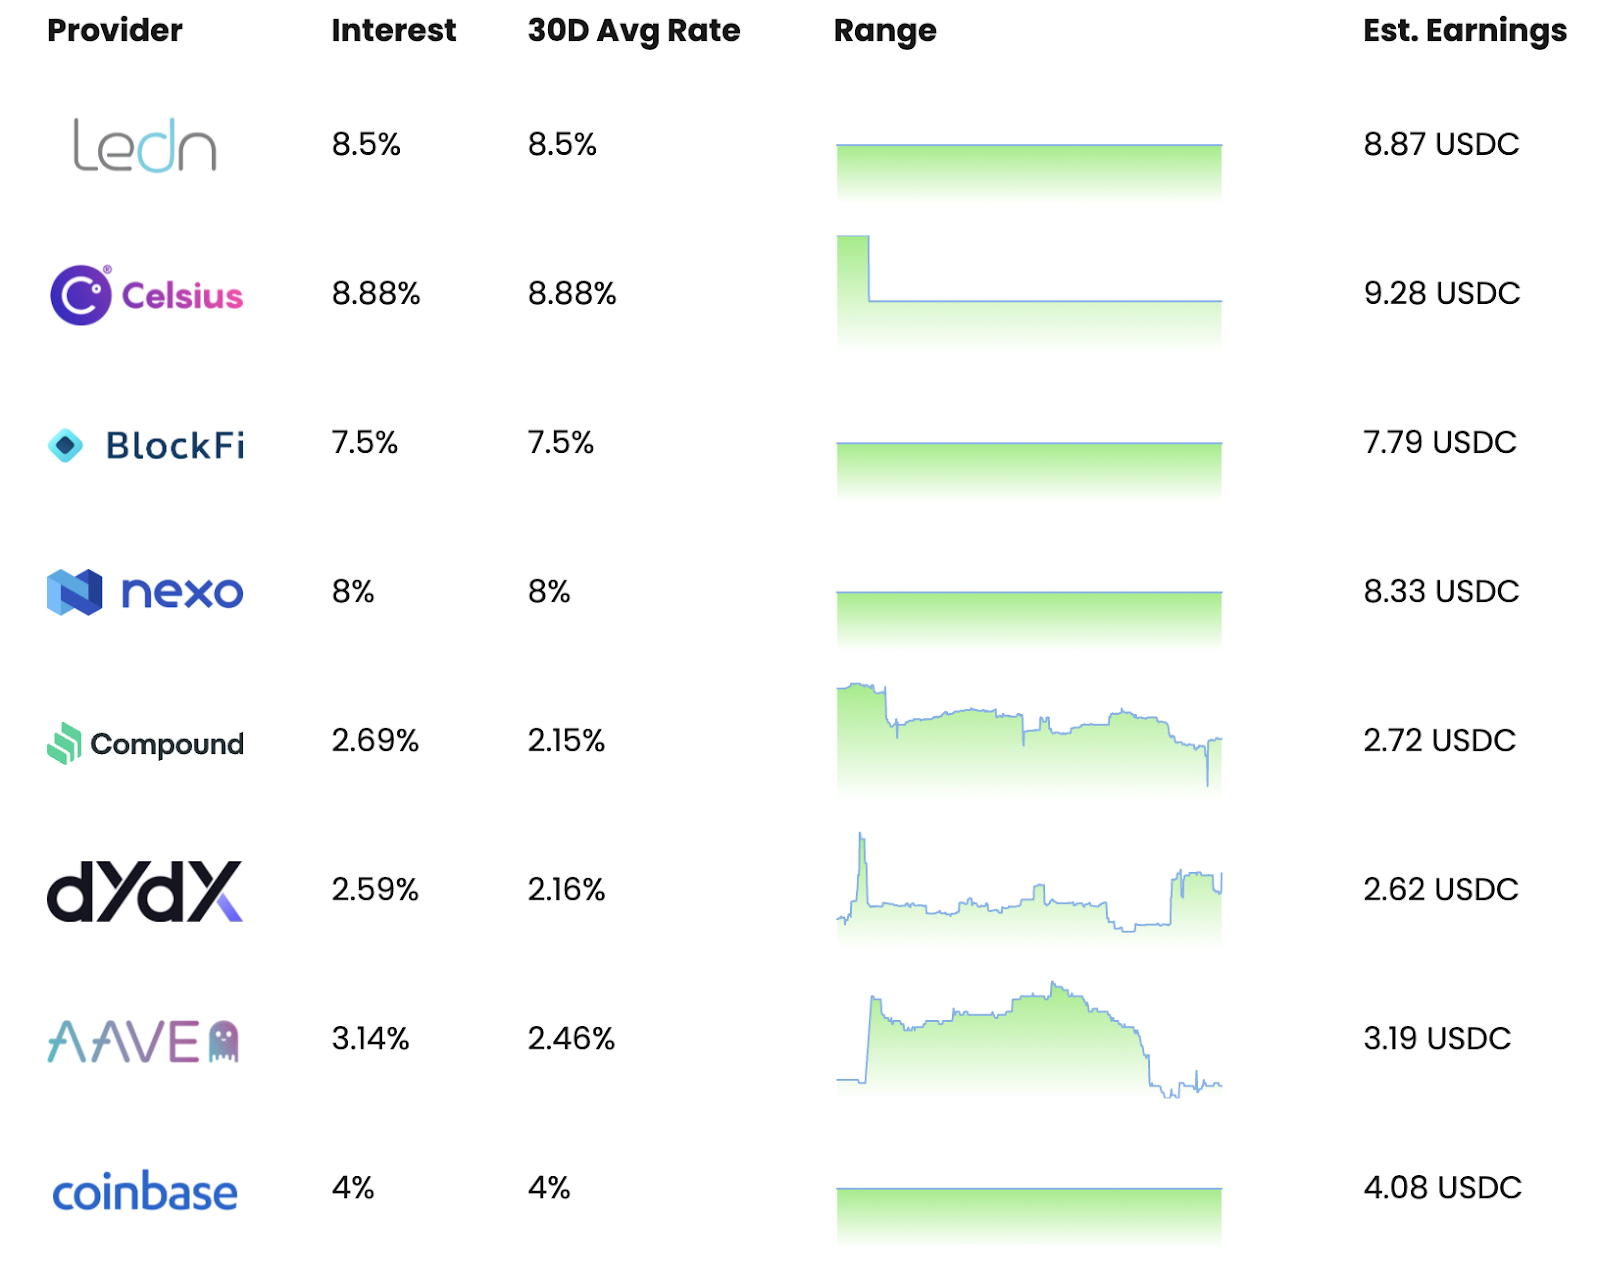 A screenshot of the most popular USDC lending platforms and their associated interest rates.